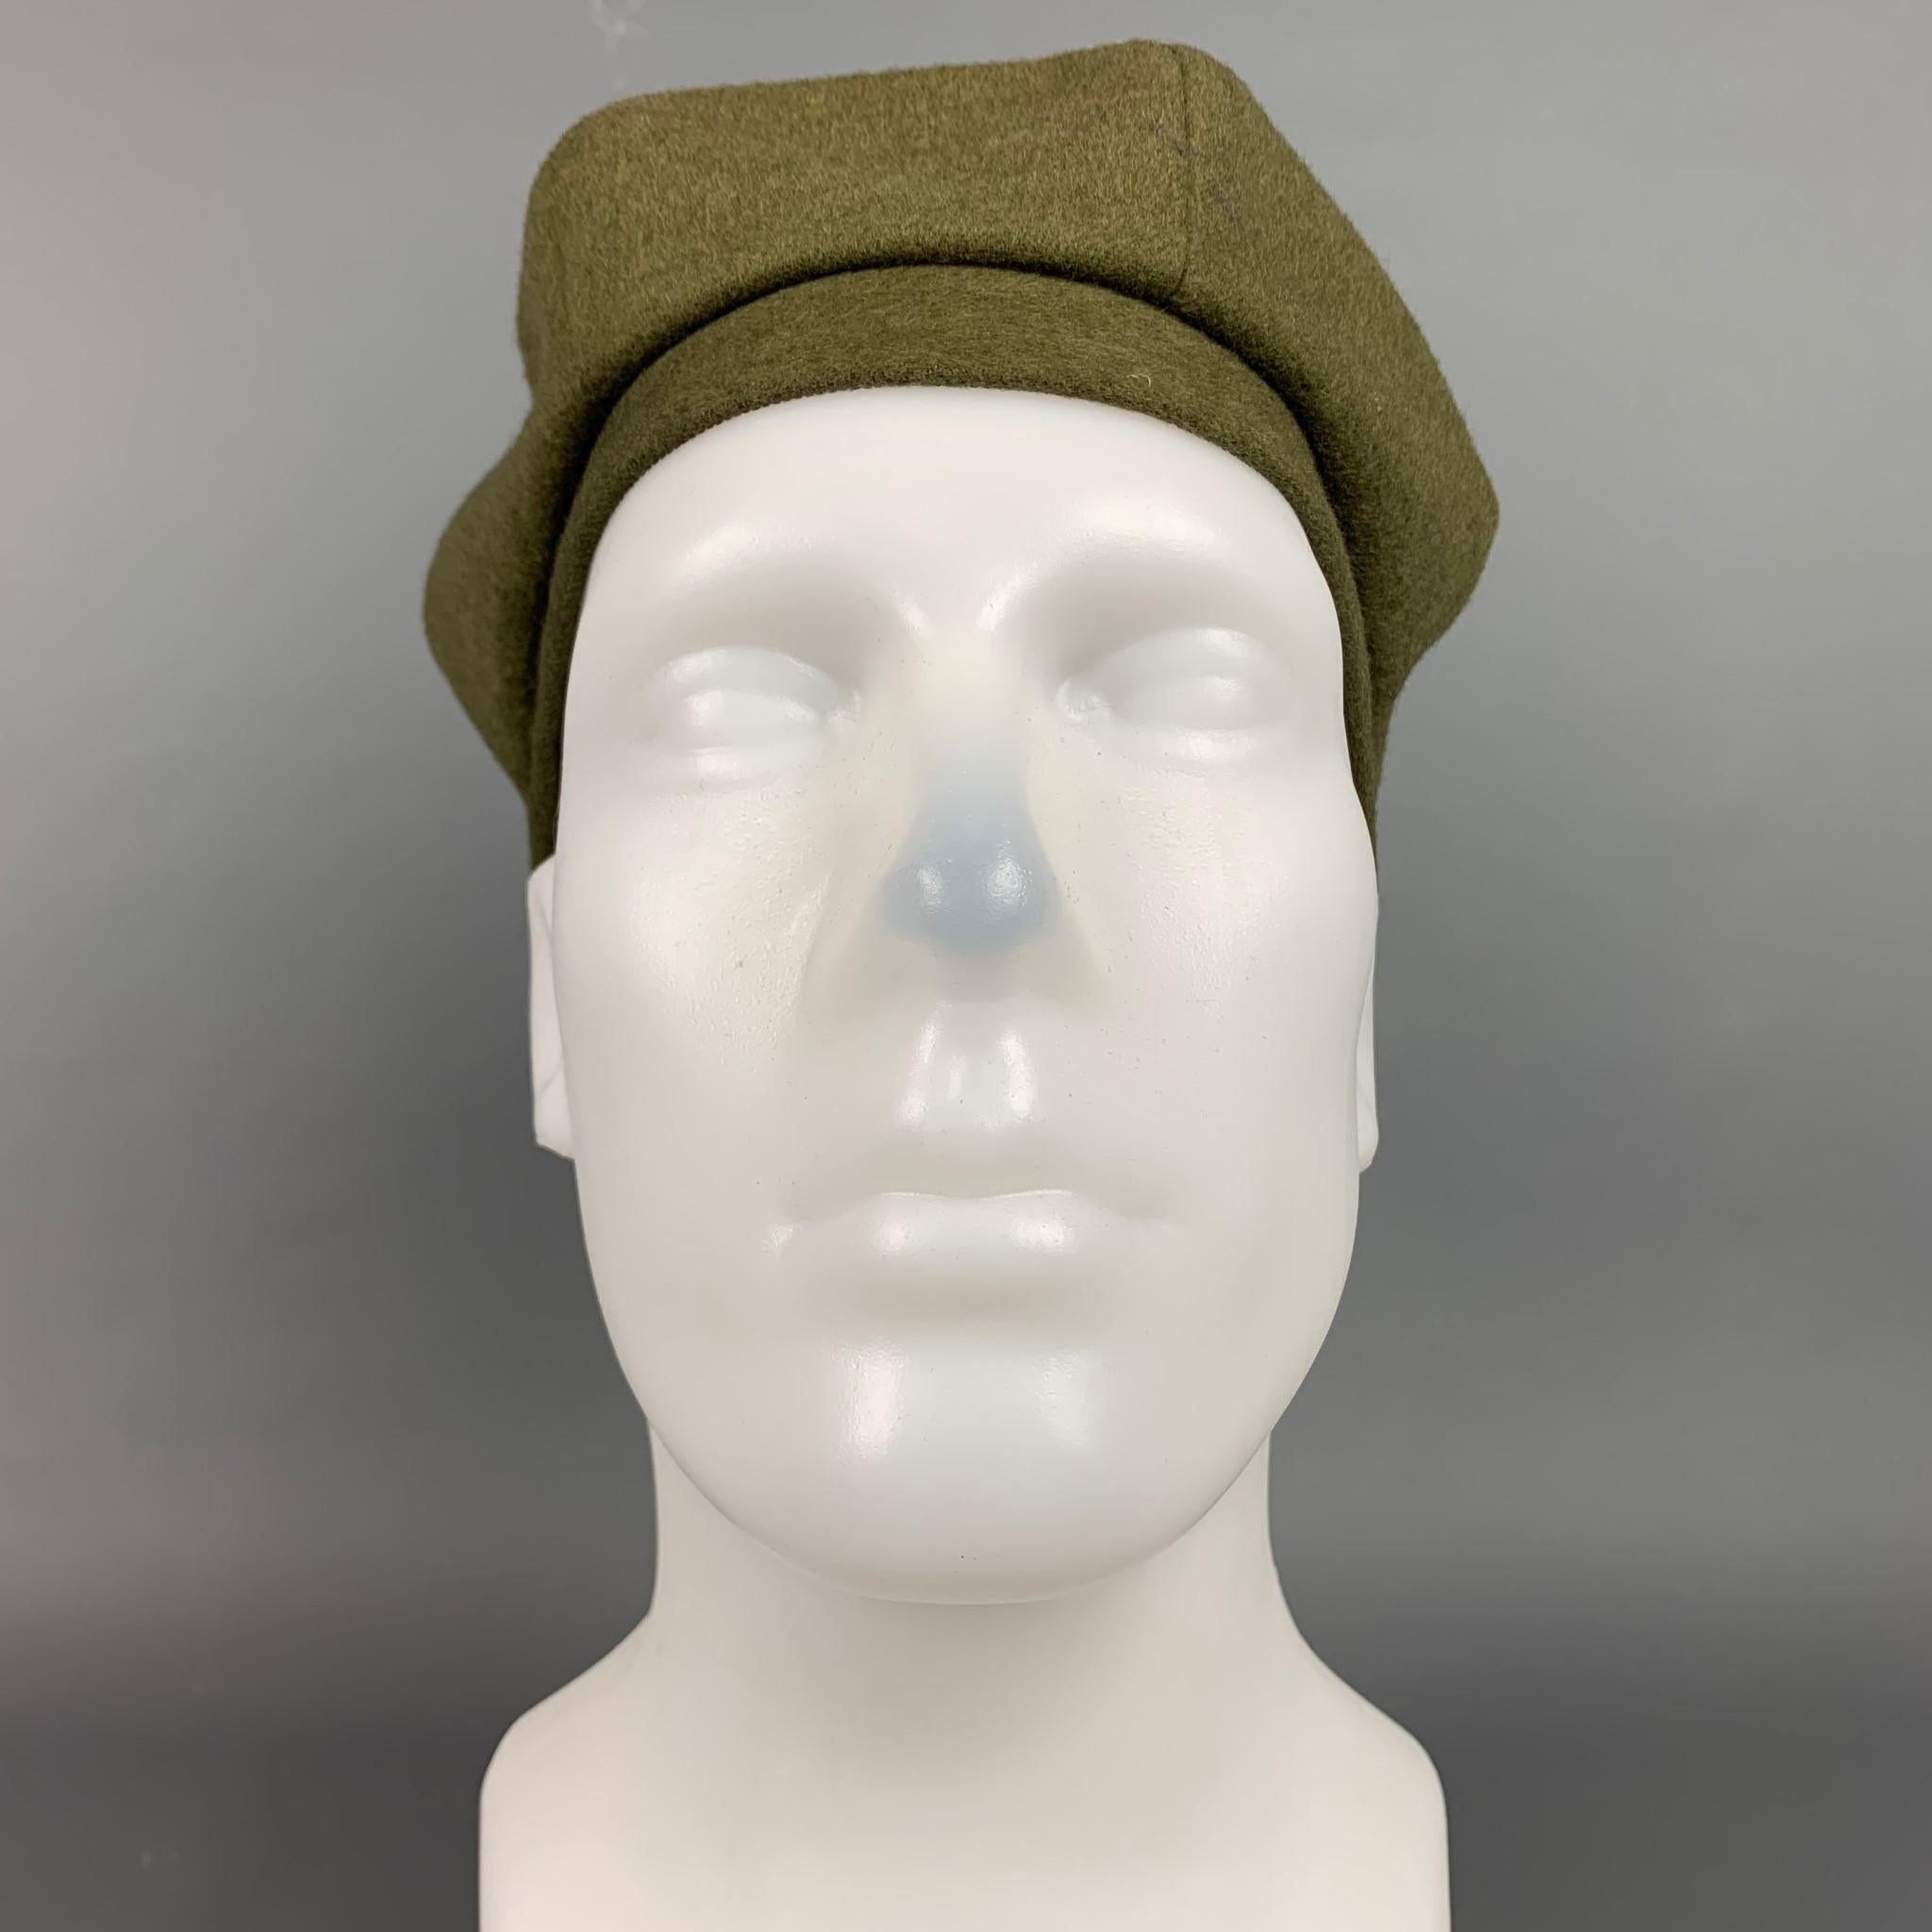 EUGENIA KIM hat comes in a olive material featuring a beret style.

Very Good Pre-Owned Condition.
Marked: Size tag removed.

Measurements:

Opening: 17 in.
Height: 5 in. 